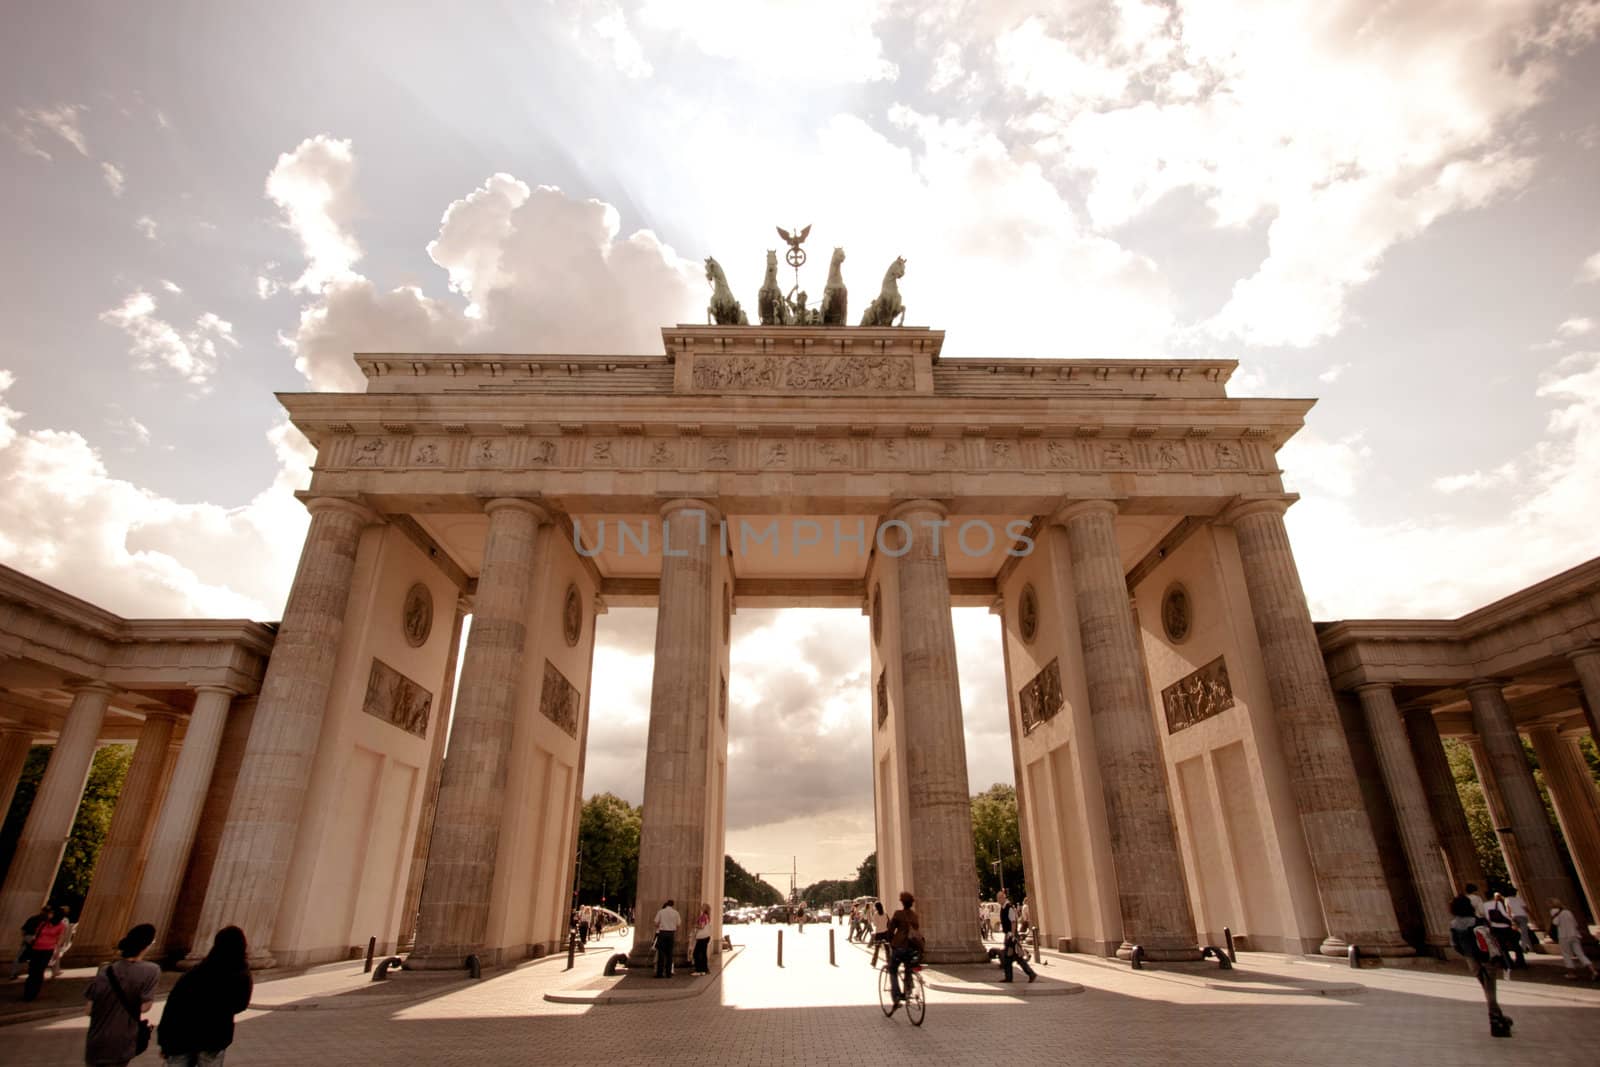 Low angle frontal view of the Brandenburg Gate in Berlin with its historical Quadriga statue